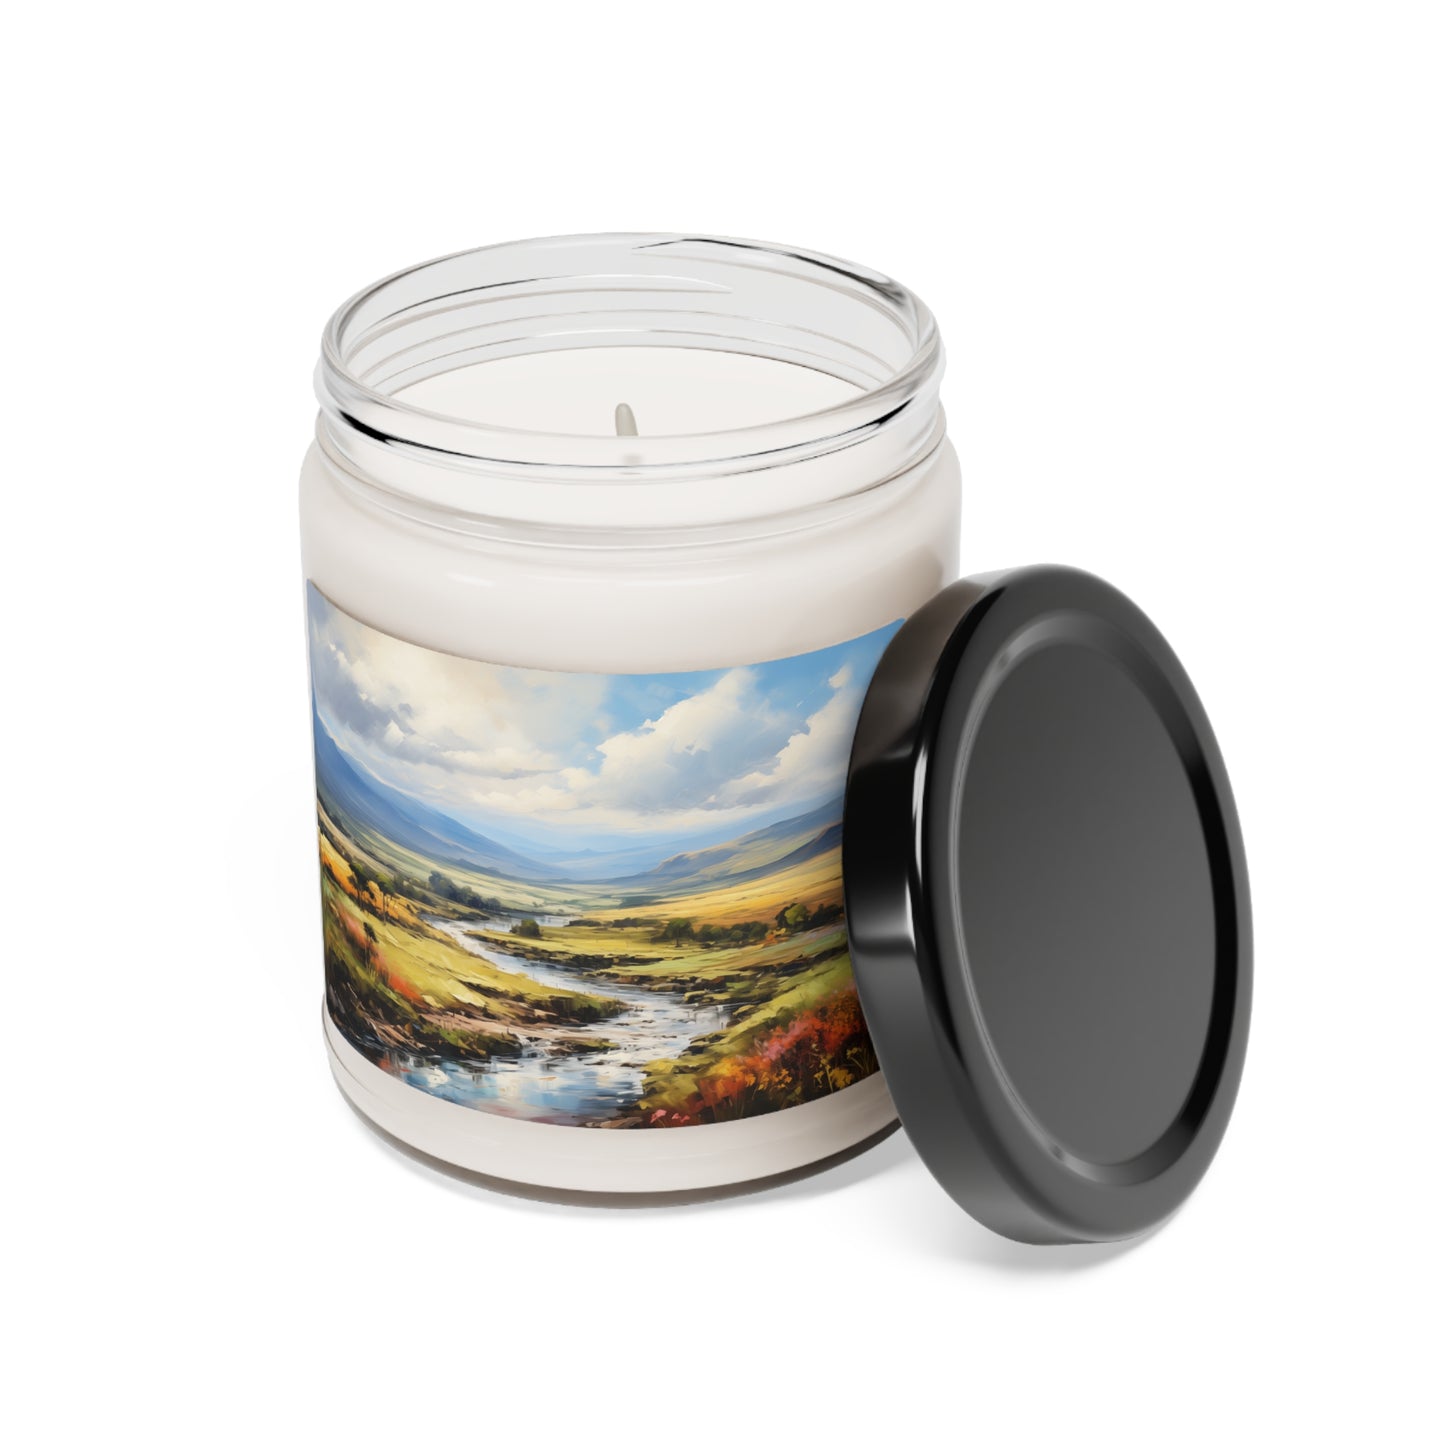 Impressionist Hills and Meadows - Scented Soy Candle, 9oz